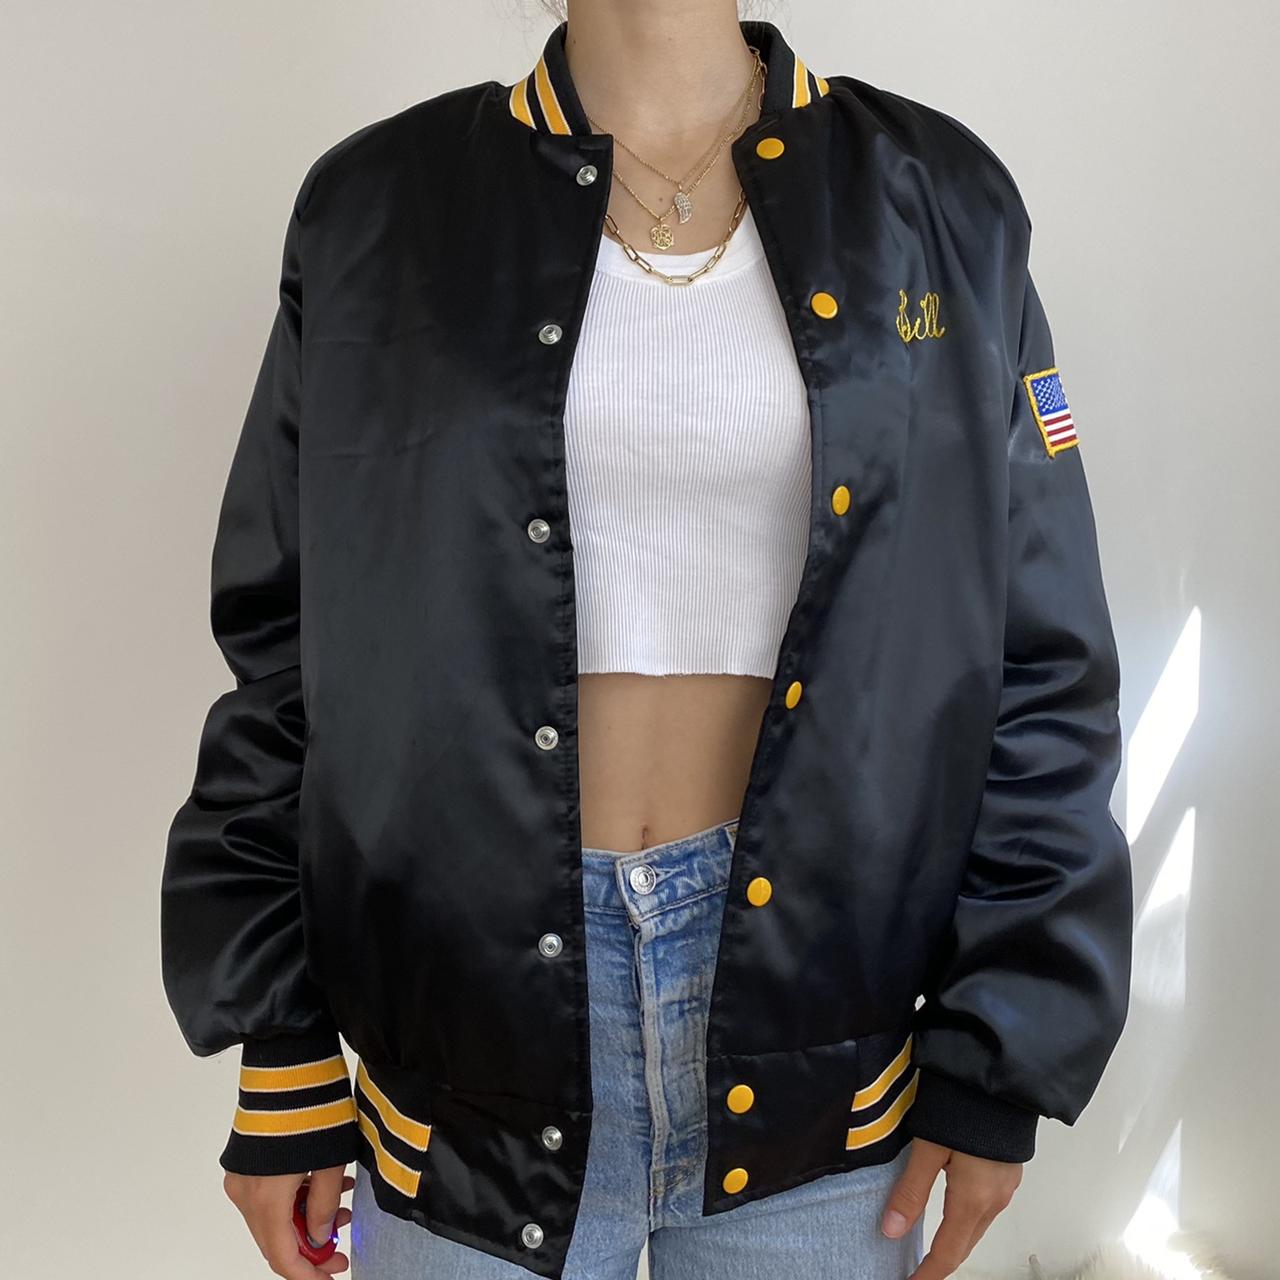 Incredible vintage 80s satin bomber jacket with...